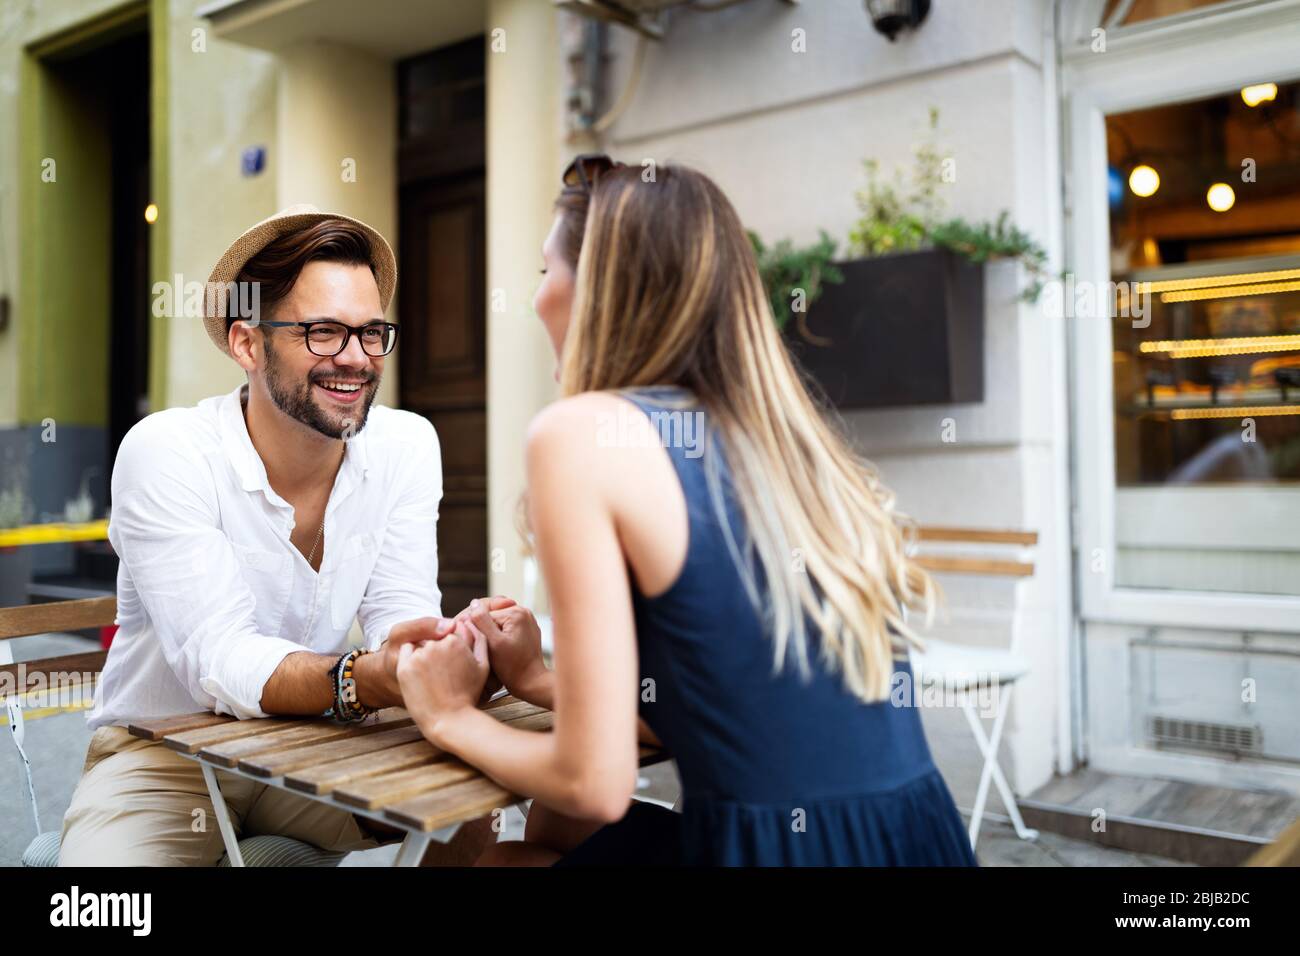 Beautiful couple in love dating outdoors and smiling Stock Photo